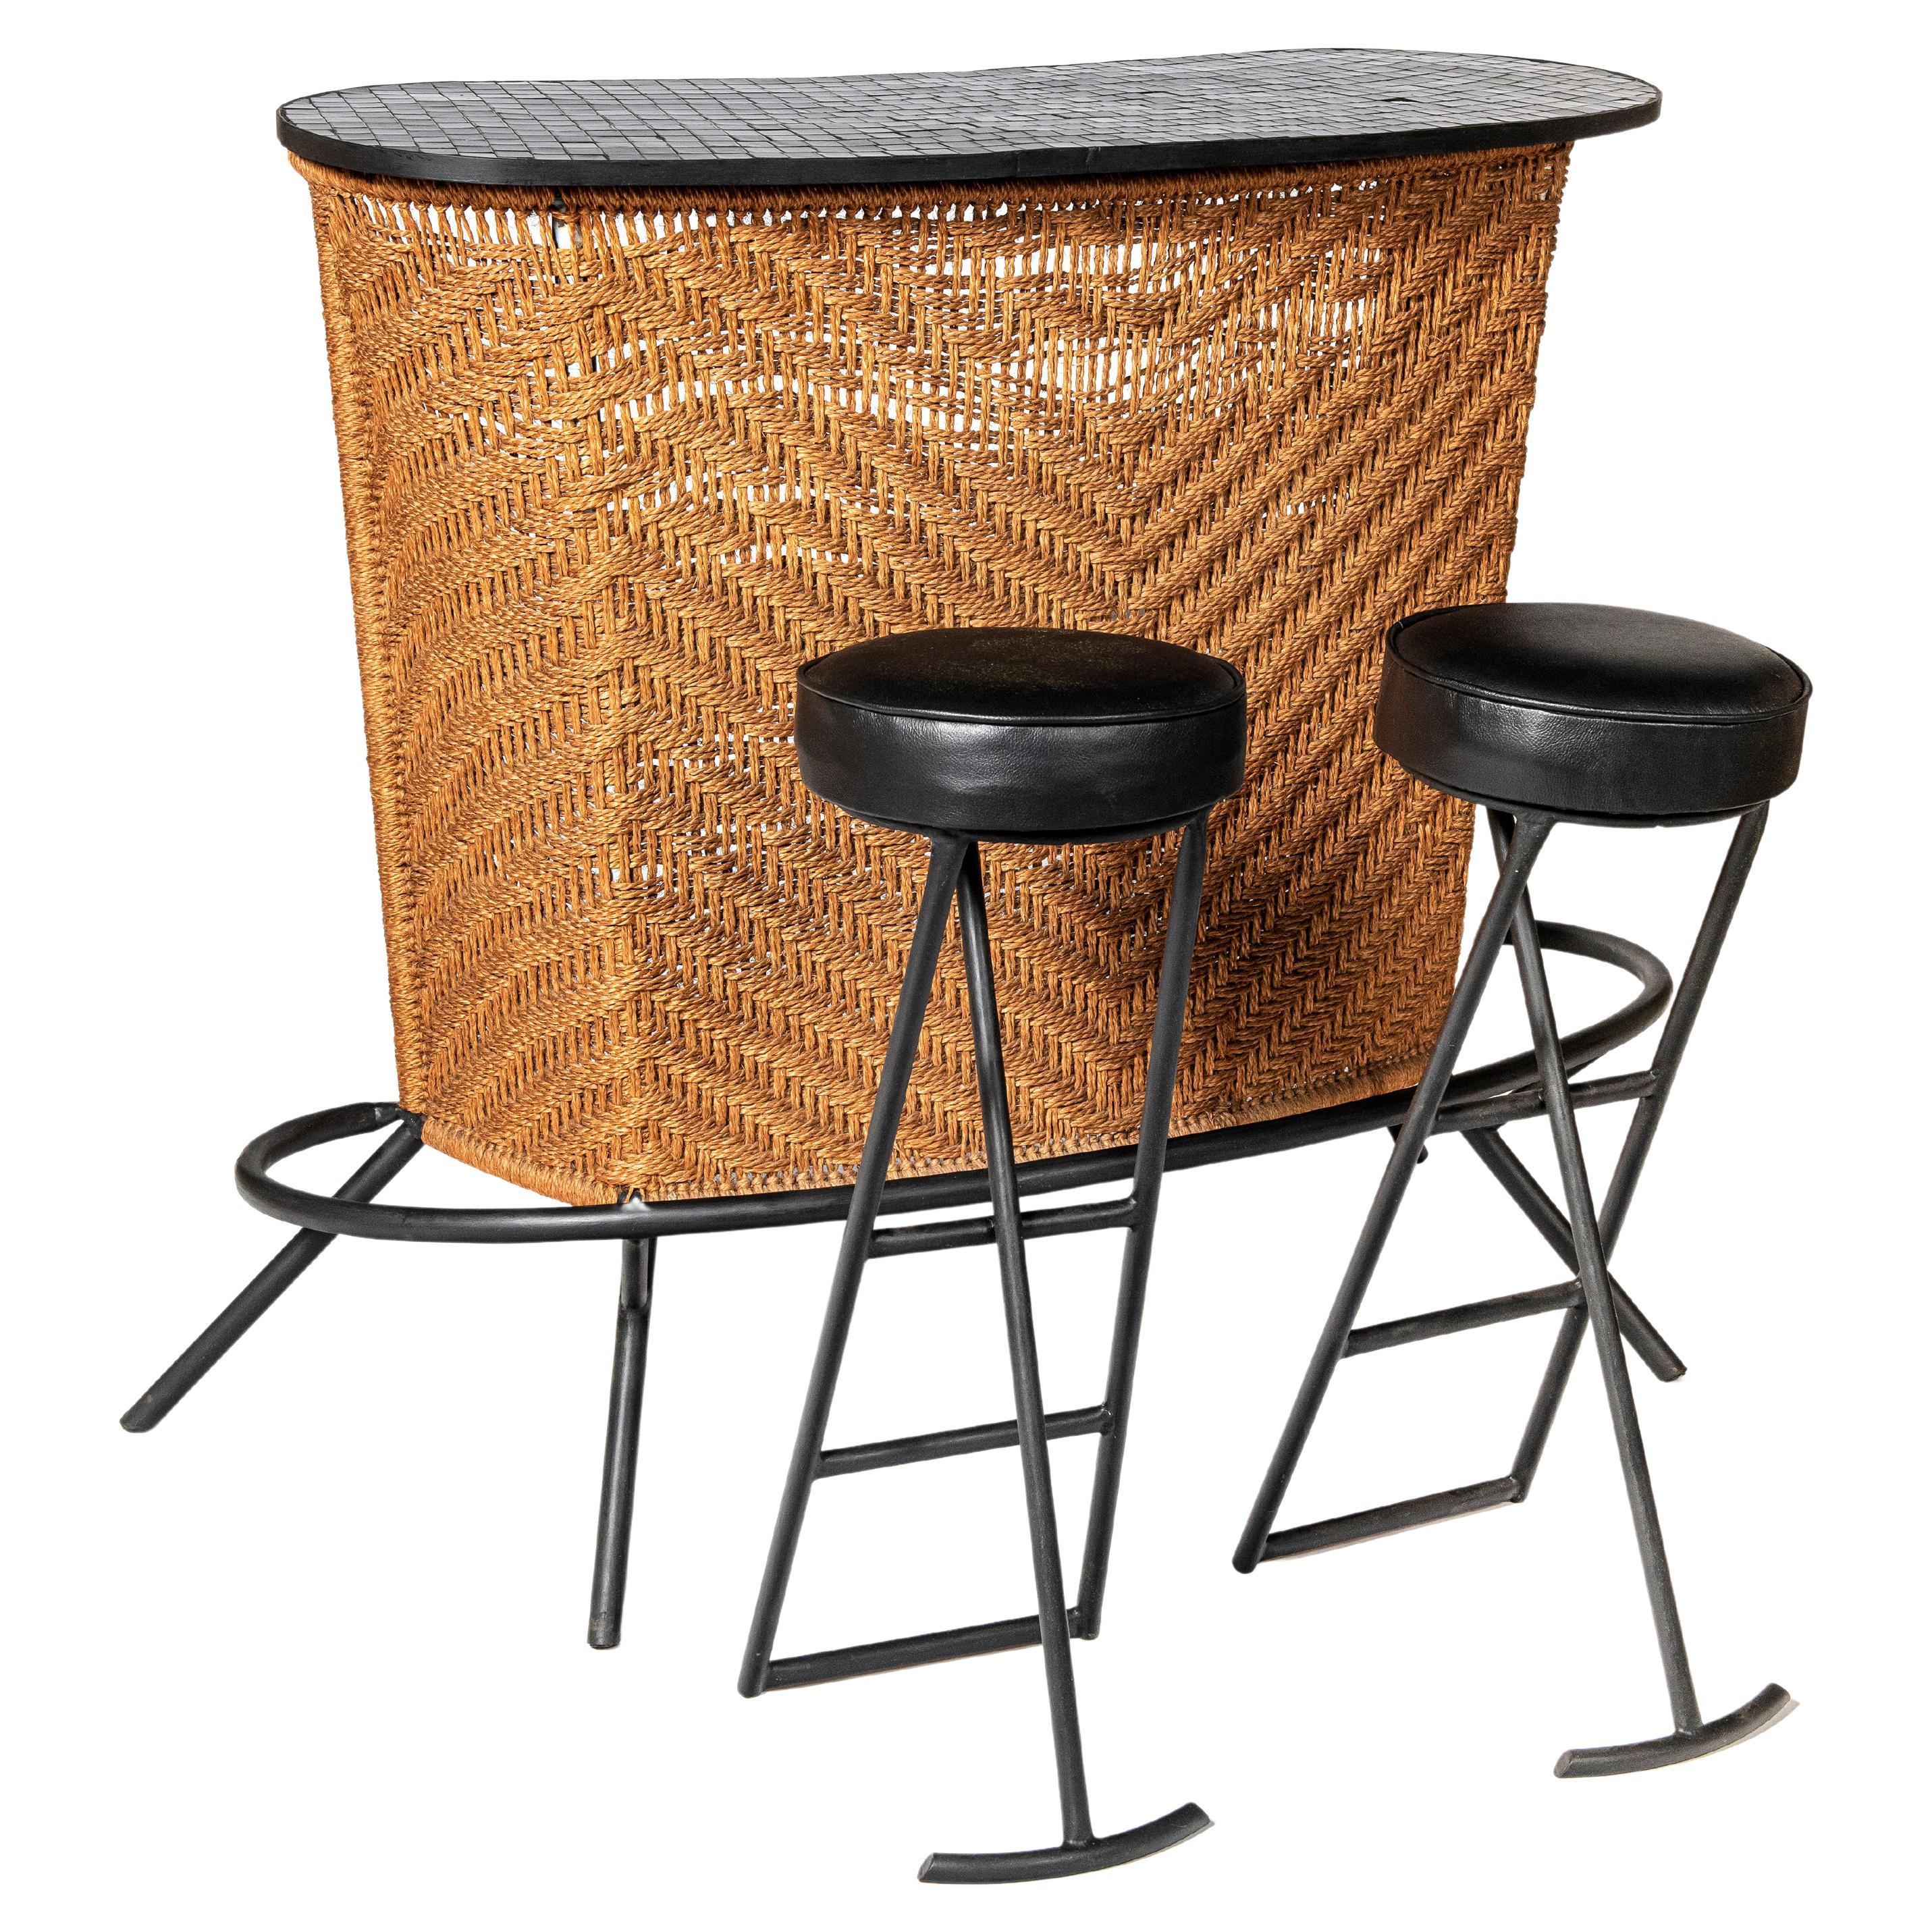 Wood, Jute, Iron, Venetian Tiles American Bar with Two Stools, Mid-20th Century For Sale